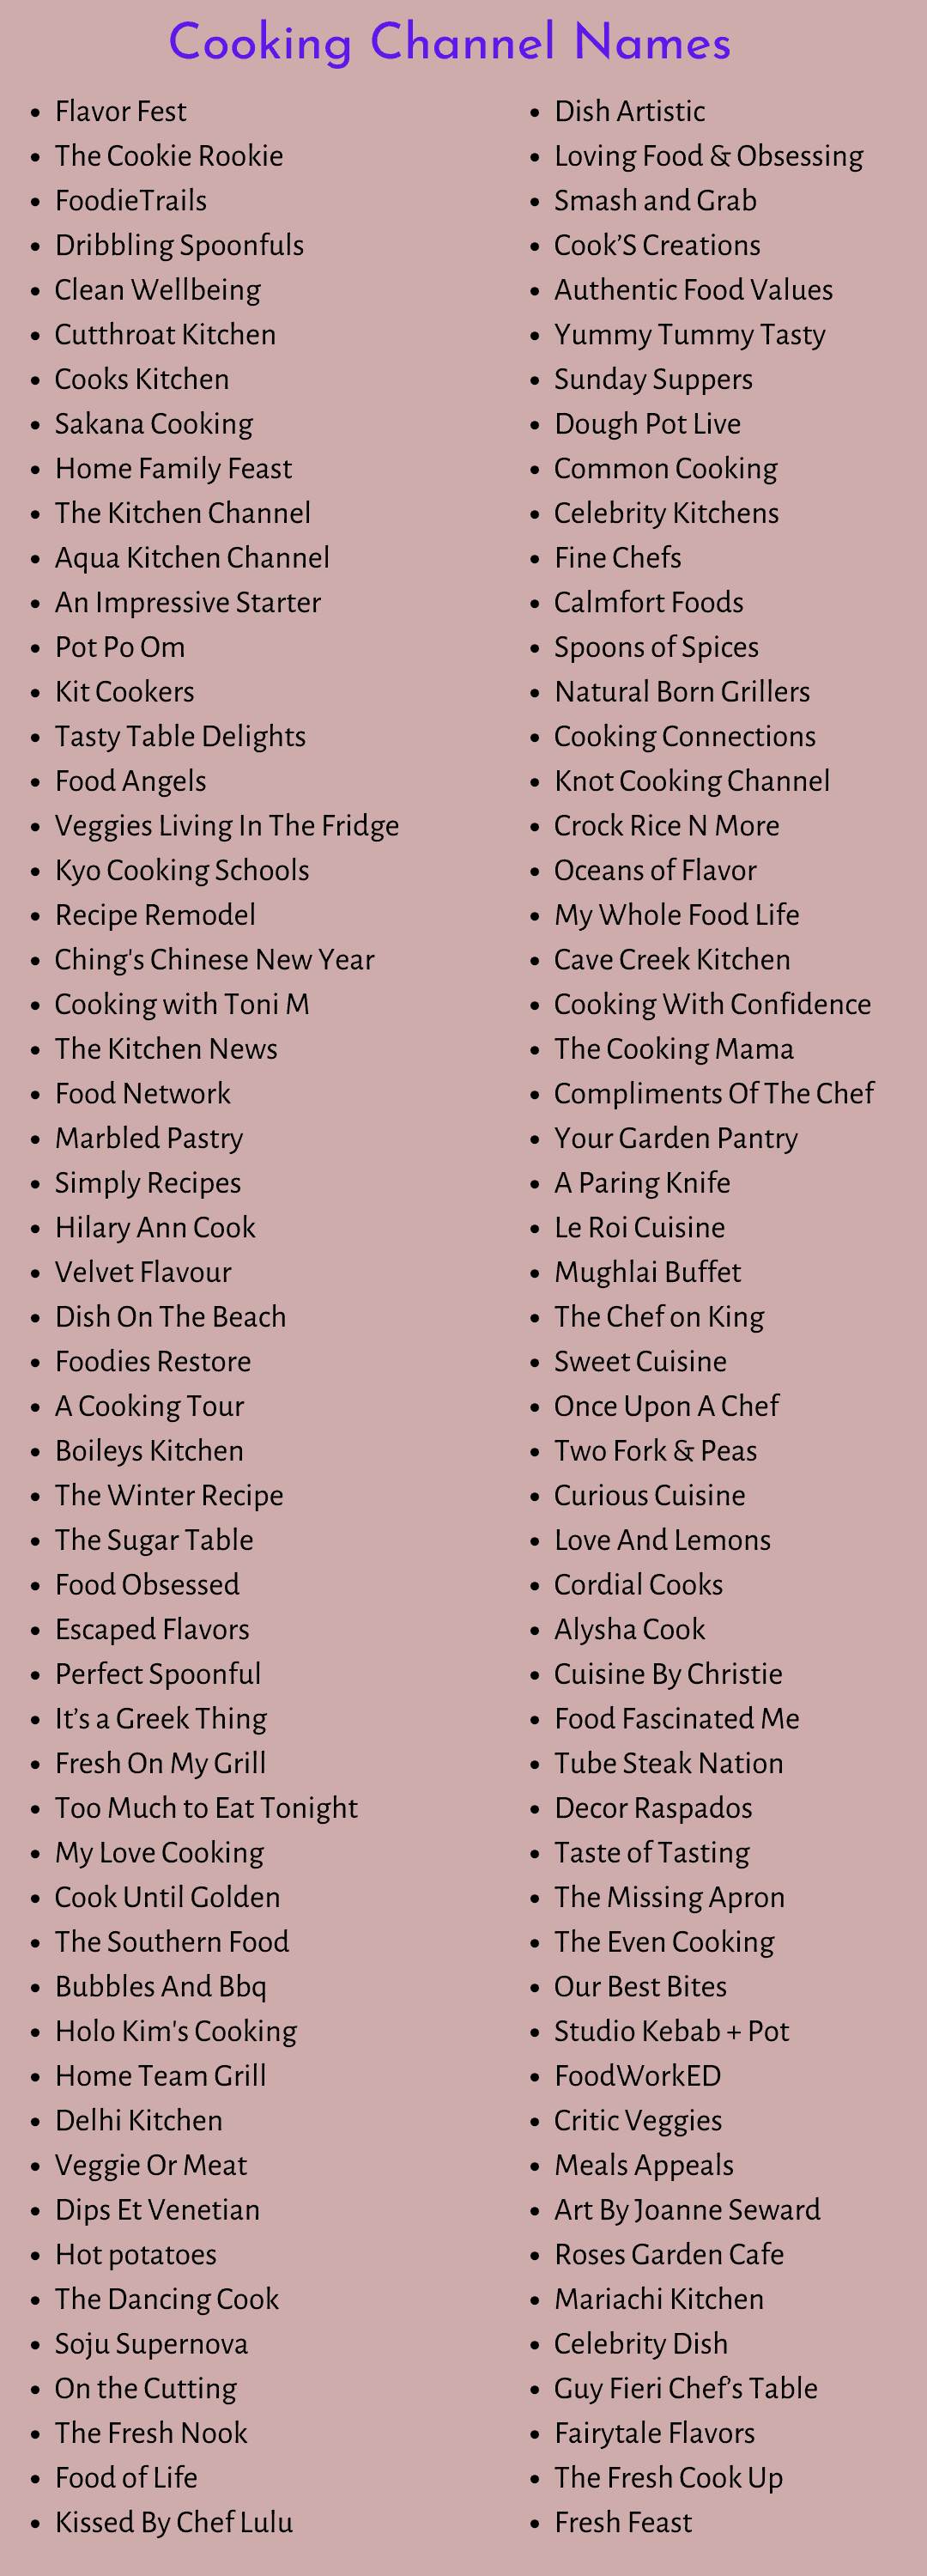 Cooking Channel Names